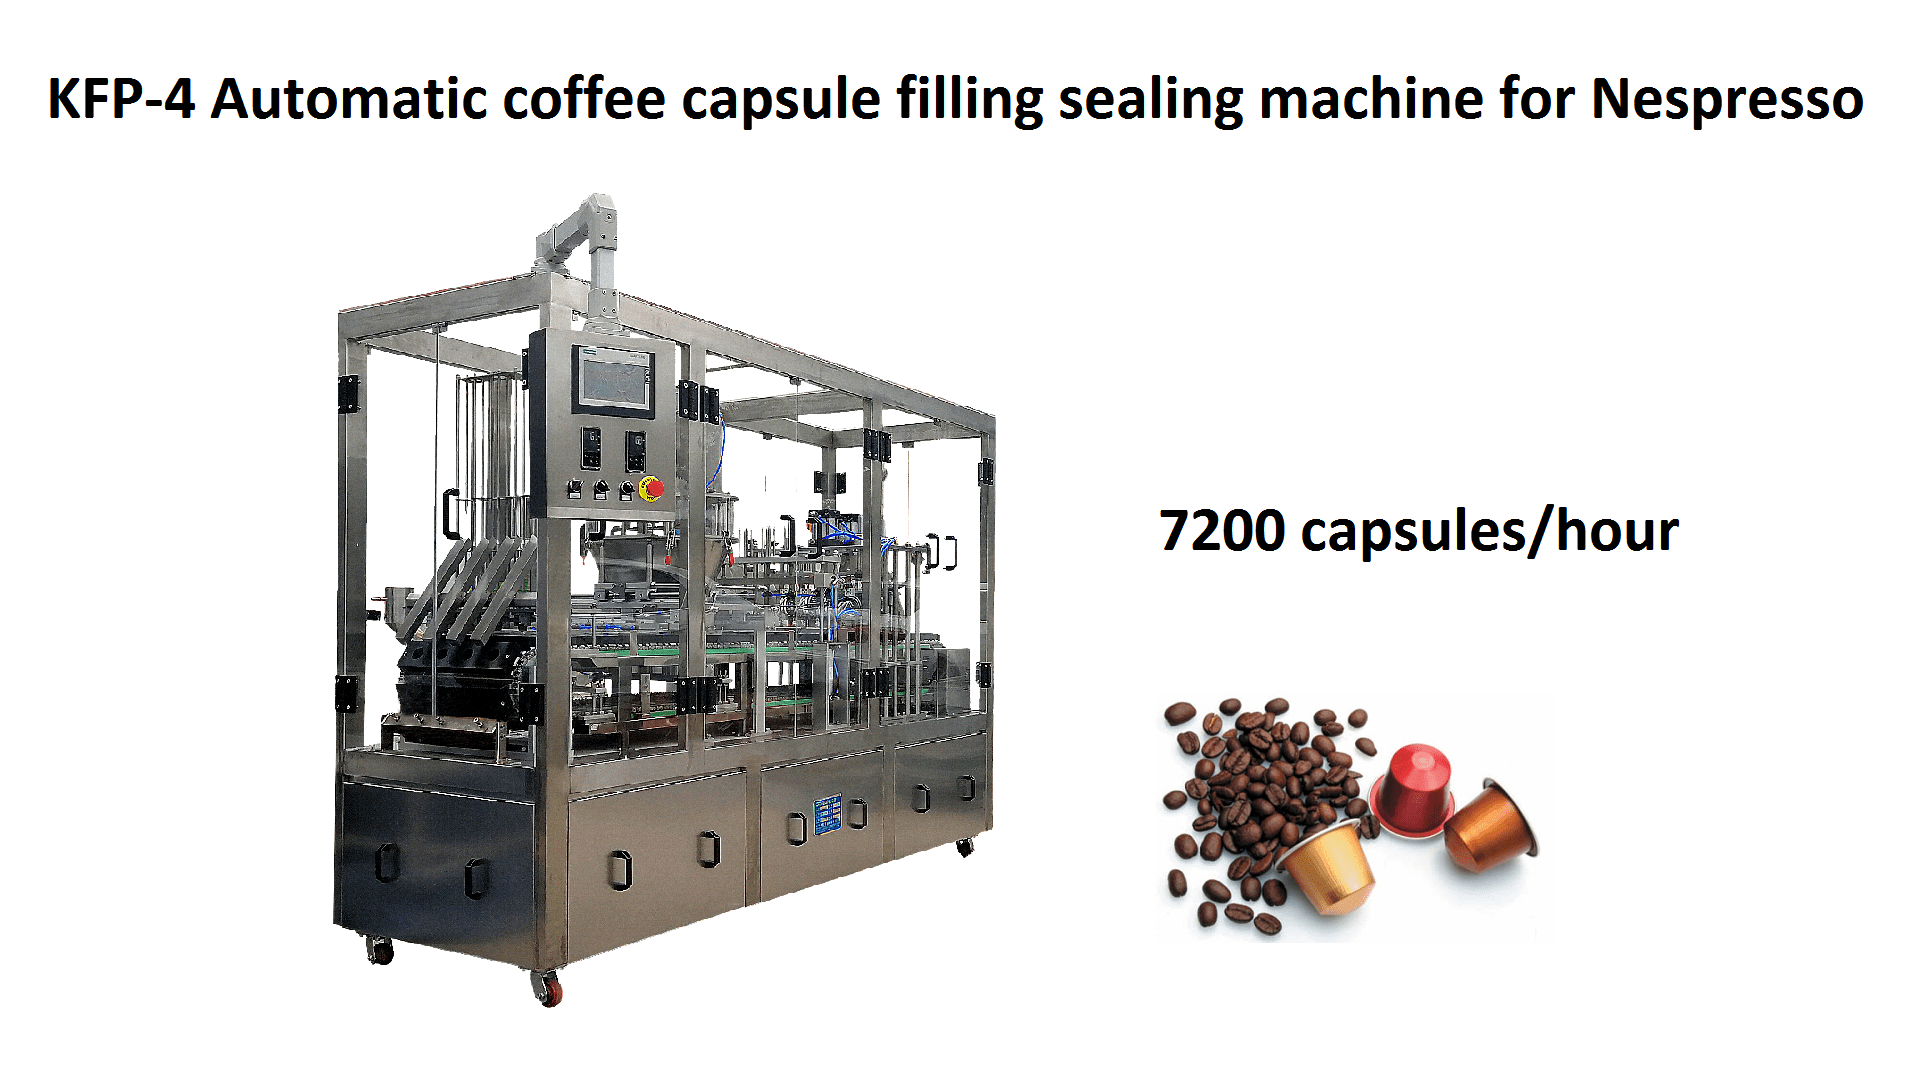 Discussion on capsule coffee and filling machine